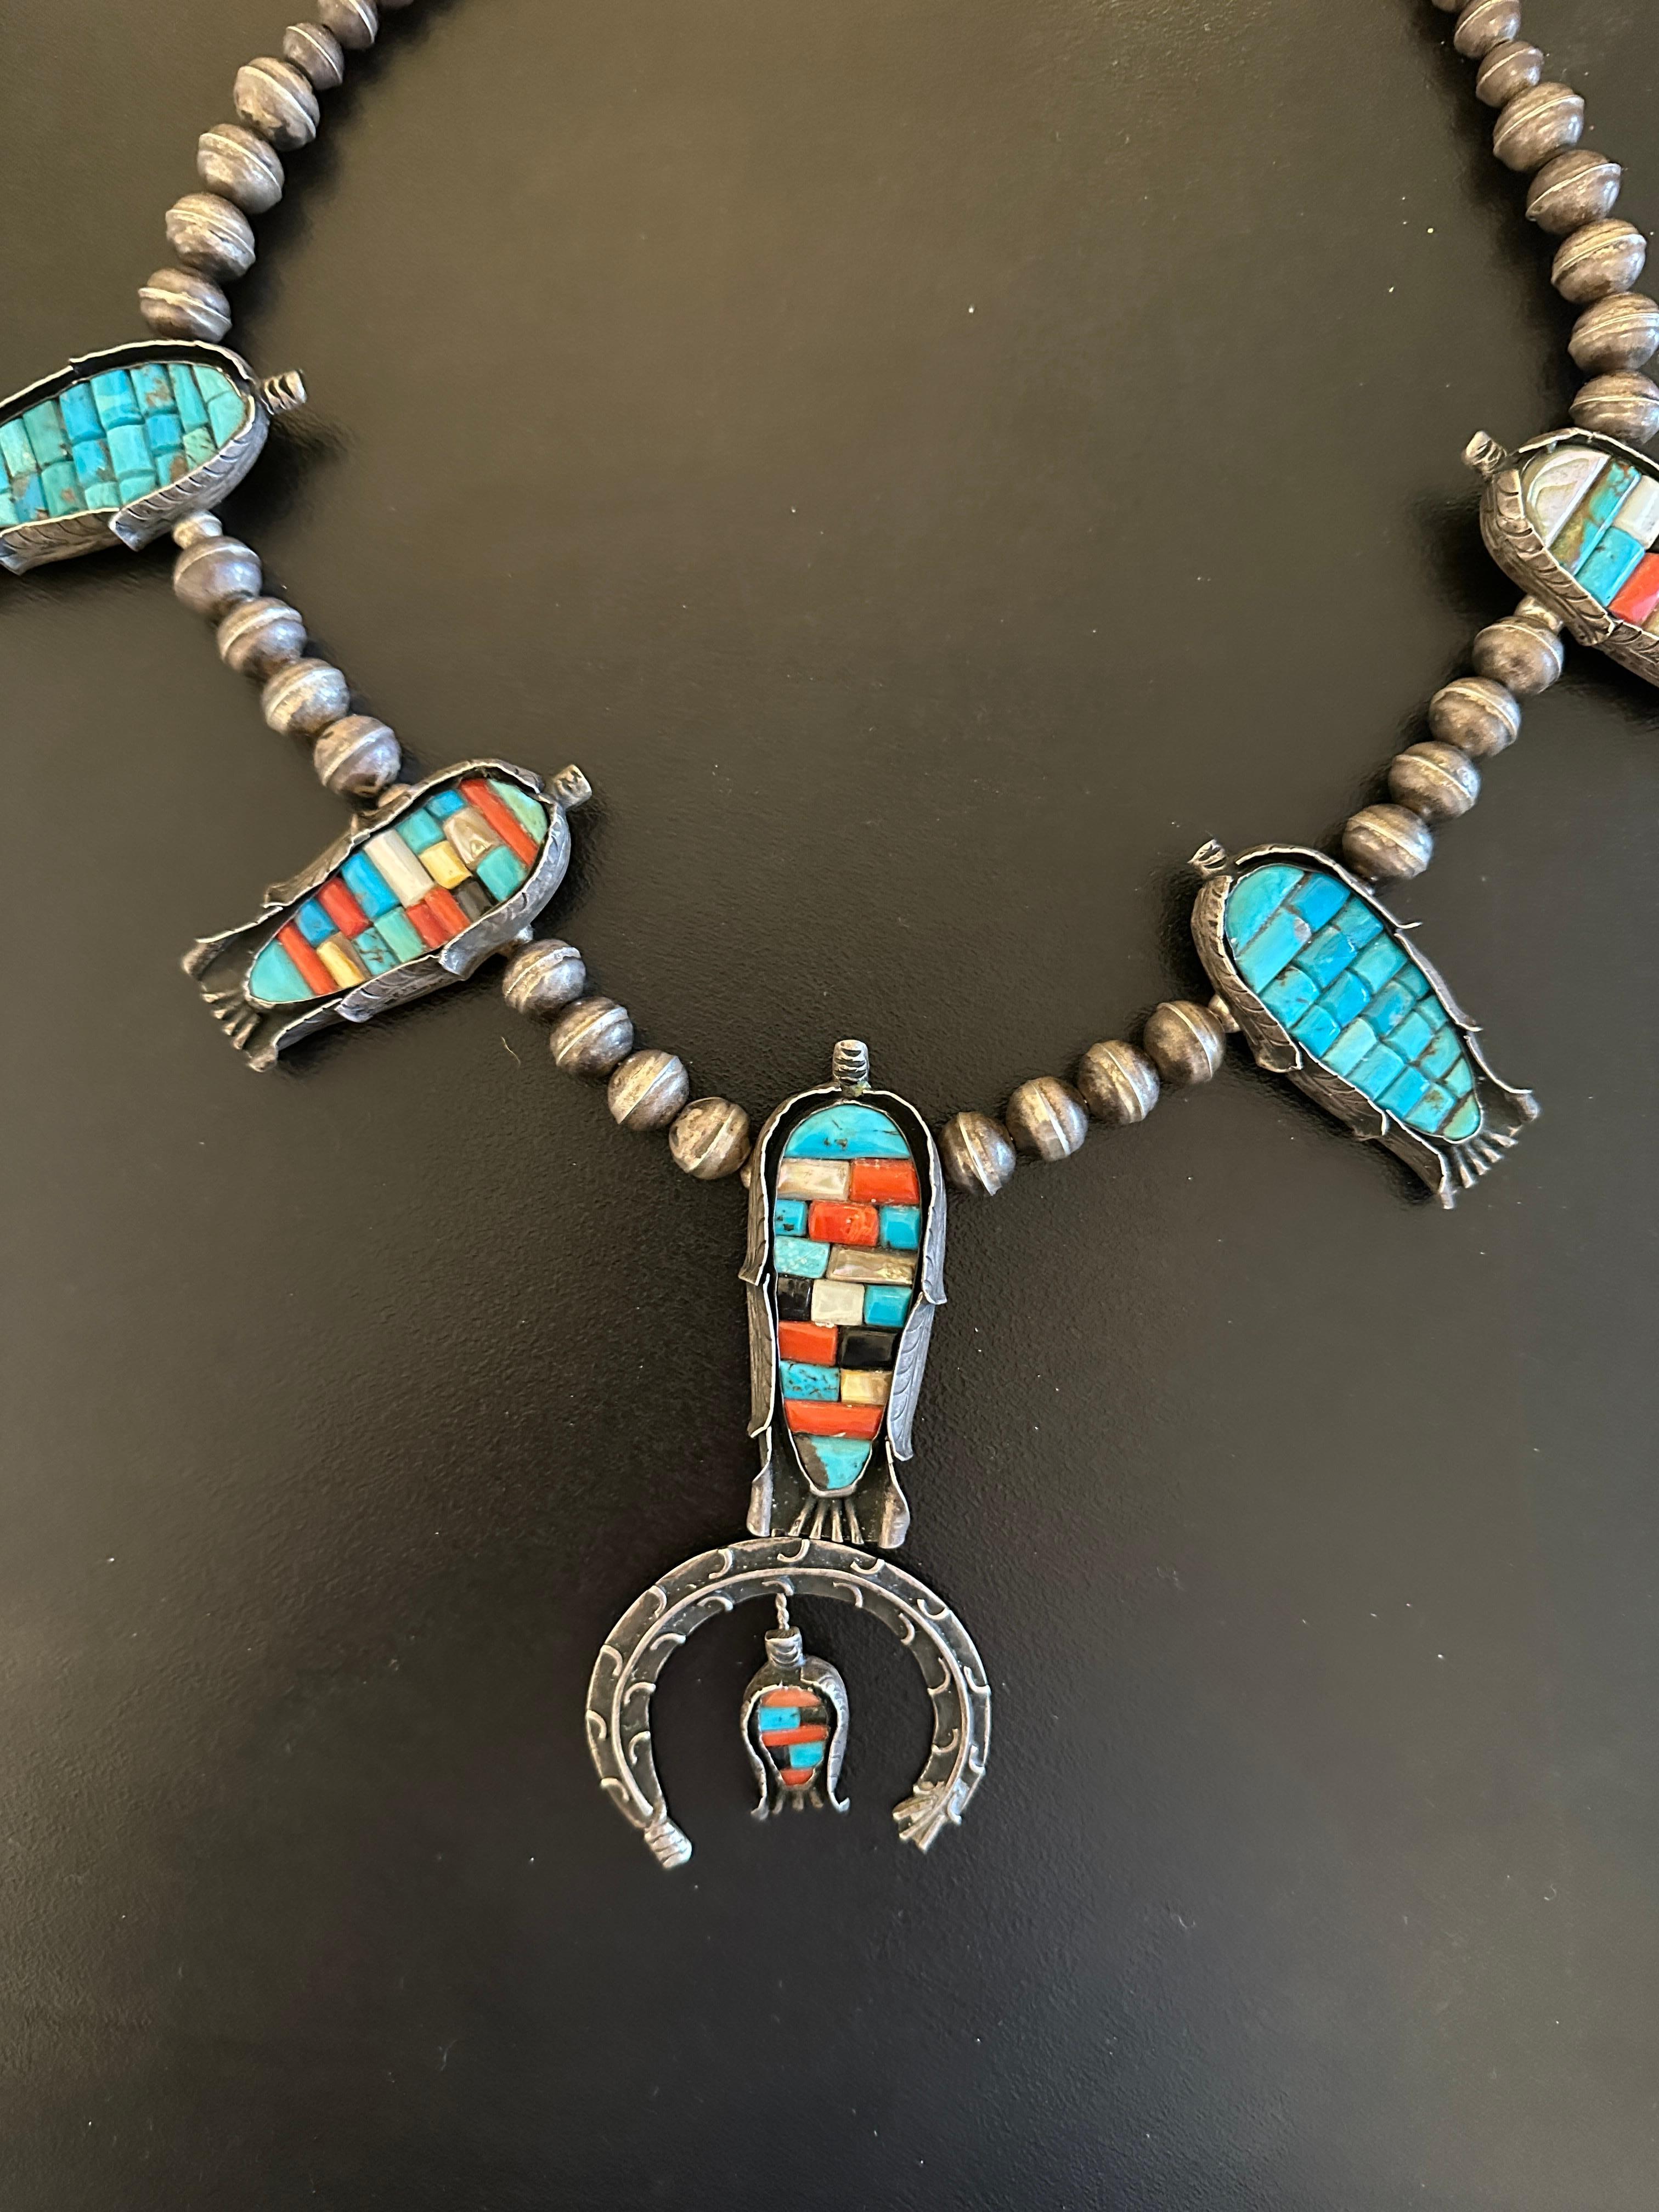 THIS IS A MAGNIFICENT ANTIQUE NAVAJO NATIVE AMERICAN INDIAN CORN MOTIF SQUASH BLOSSOM NECKLACE WITH TURQUOISE, CORAL, BLACK ONYX AND MOTHER OF PEARL, DATING TO CIRCA 1930.  THE NECKLACE IS A MUSEUM QUALITY PIECE AND IS EXTREMELY RARE. 
THE EARLY